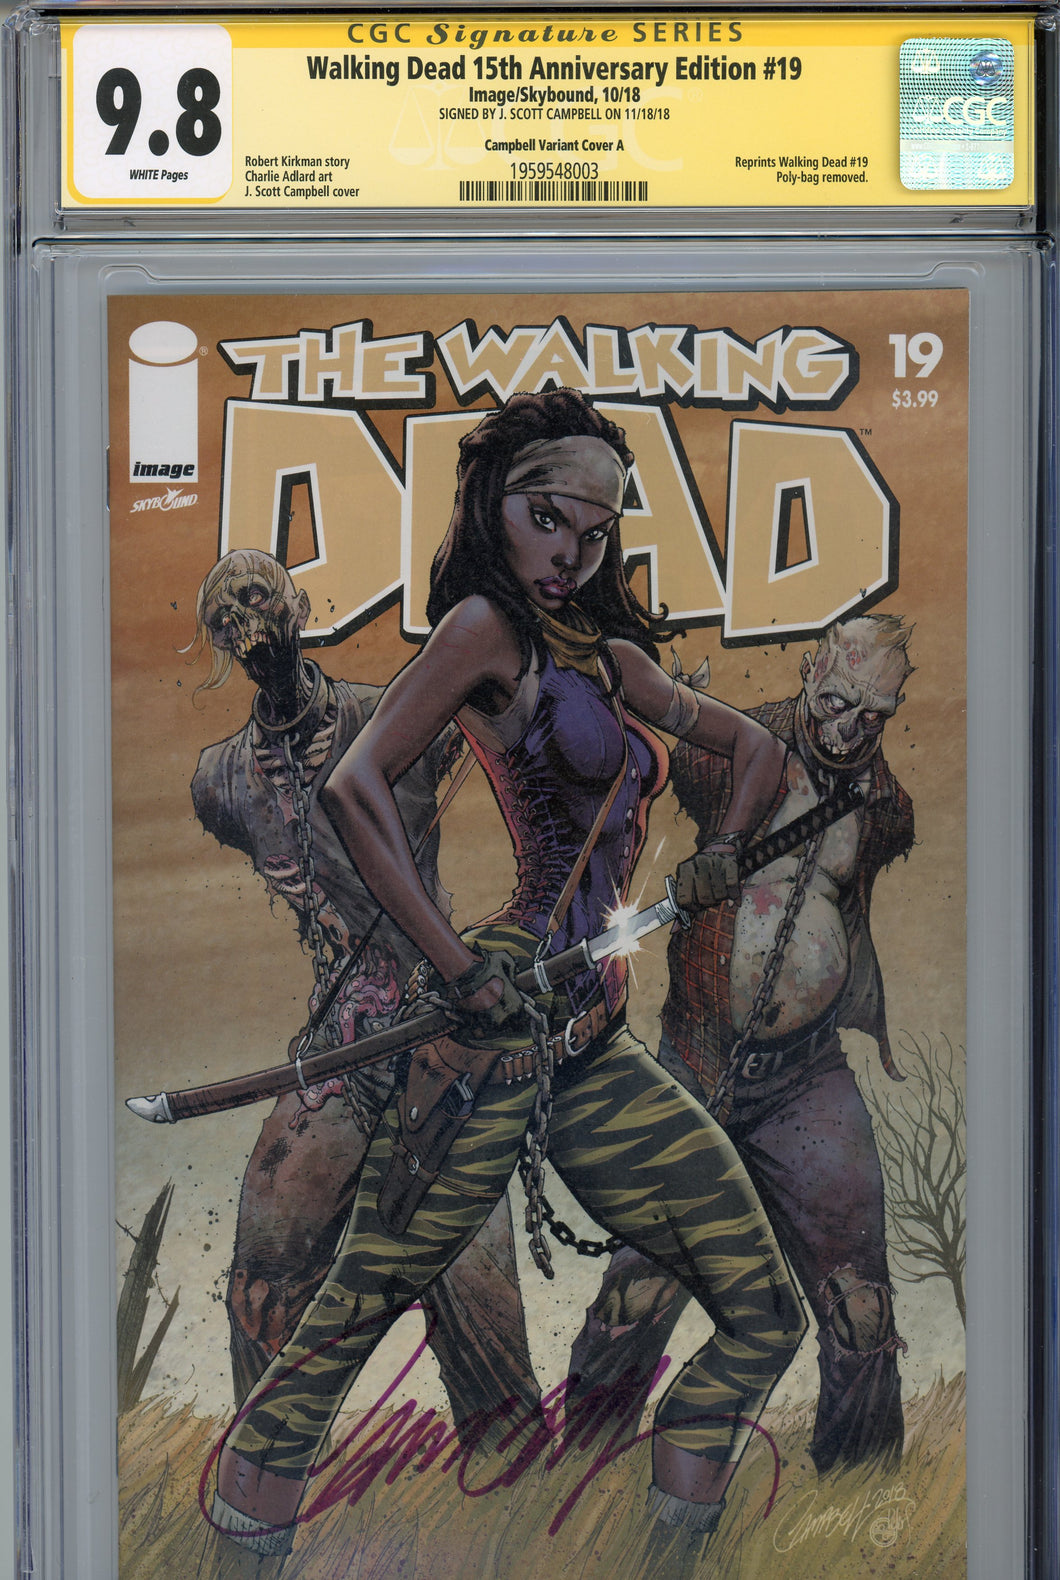 Walking Dead 15th Anniversary Edition #19 CGC 9.8 SS Signed Campbell